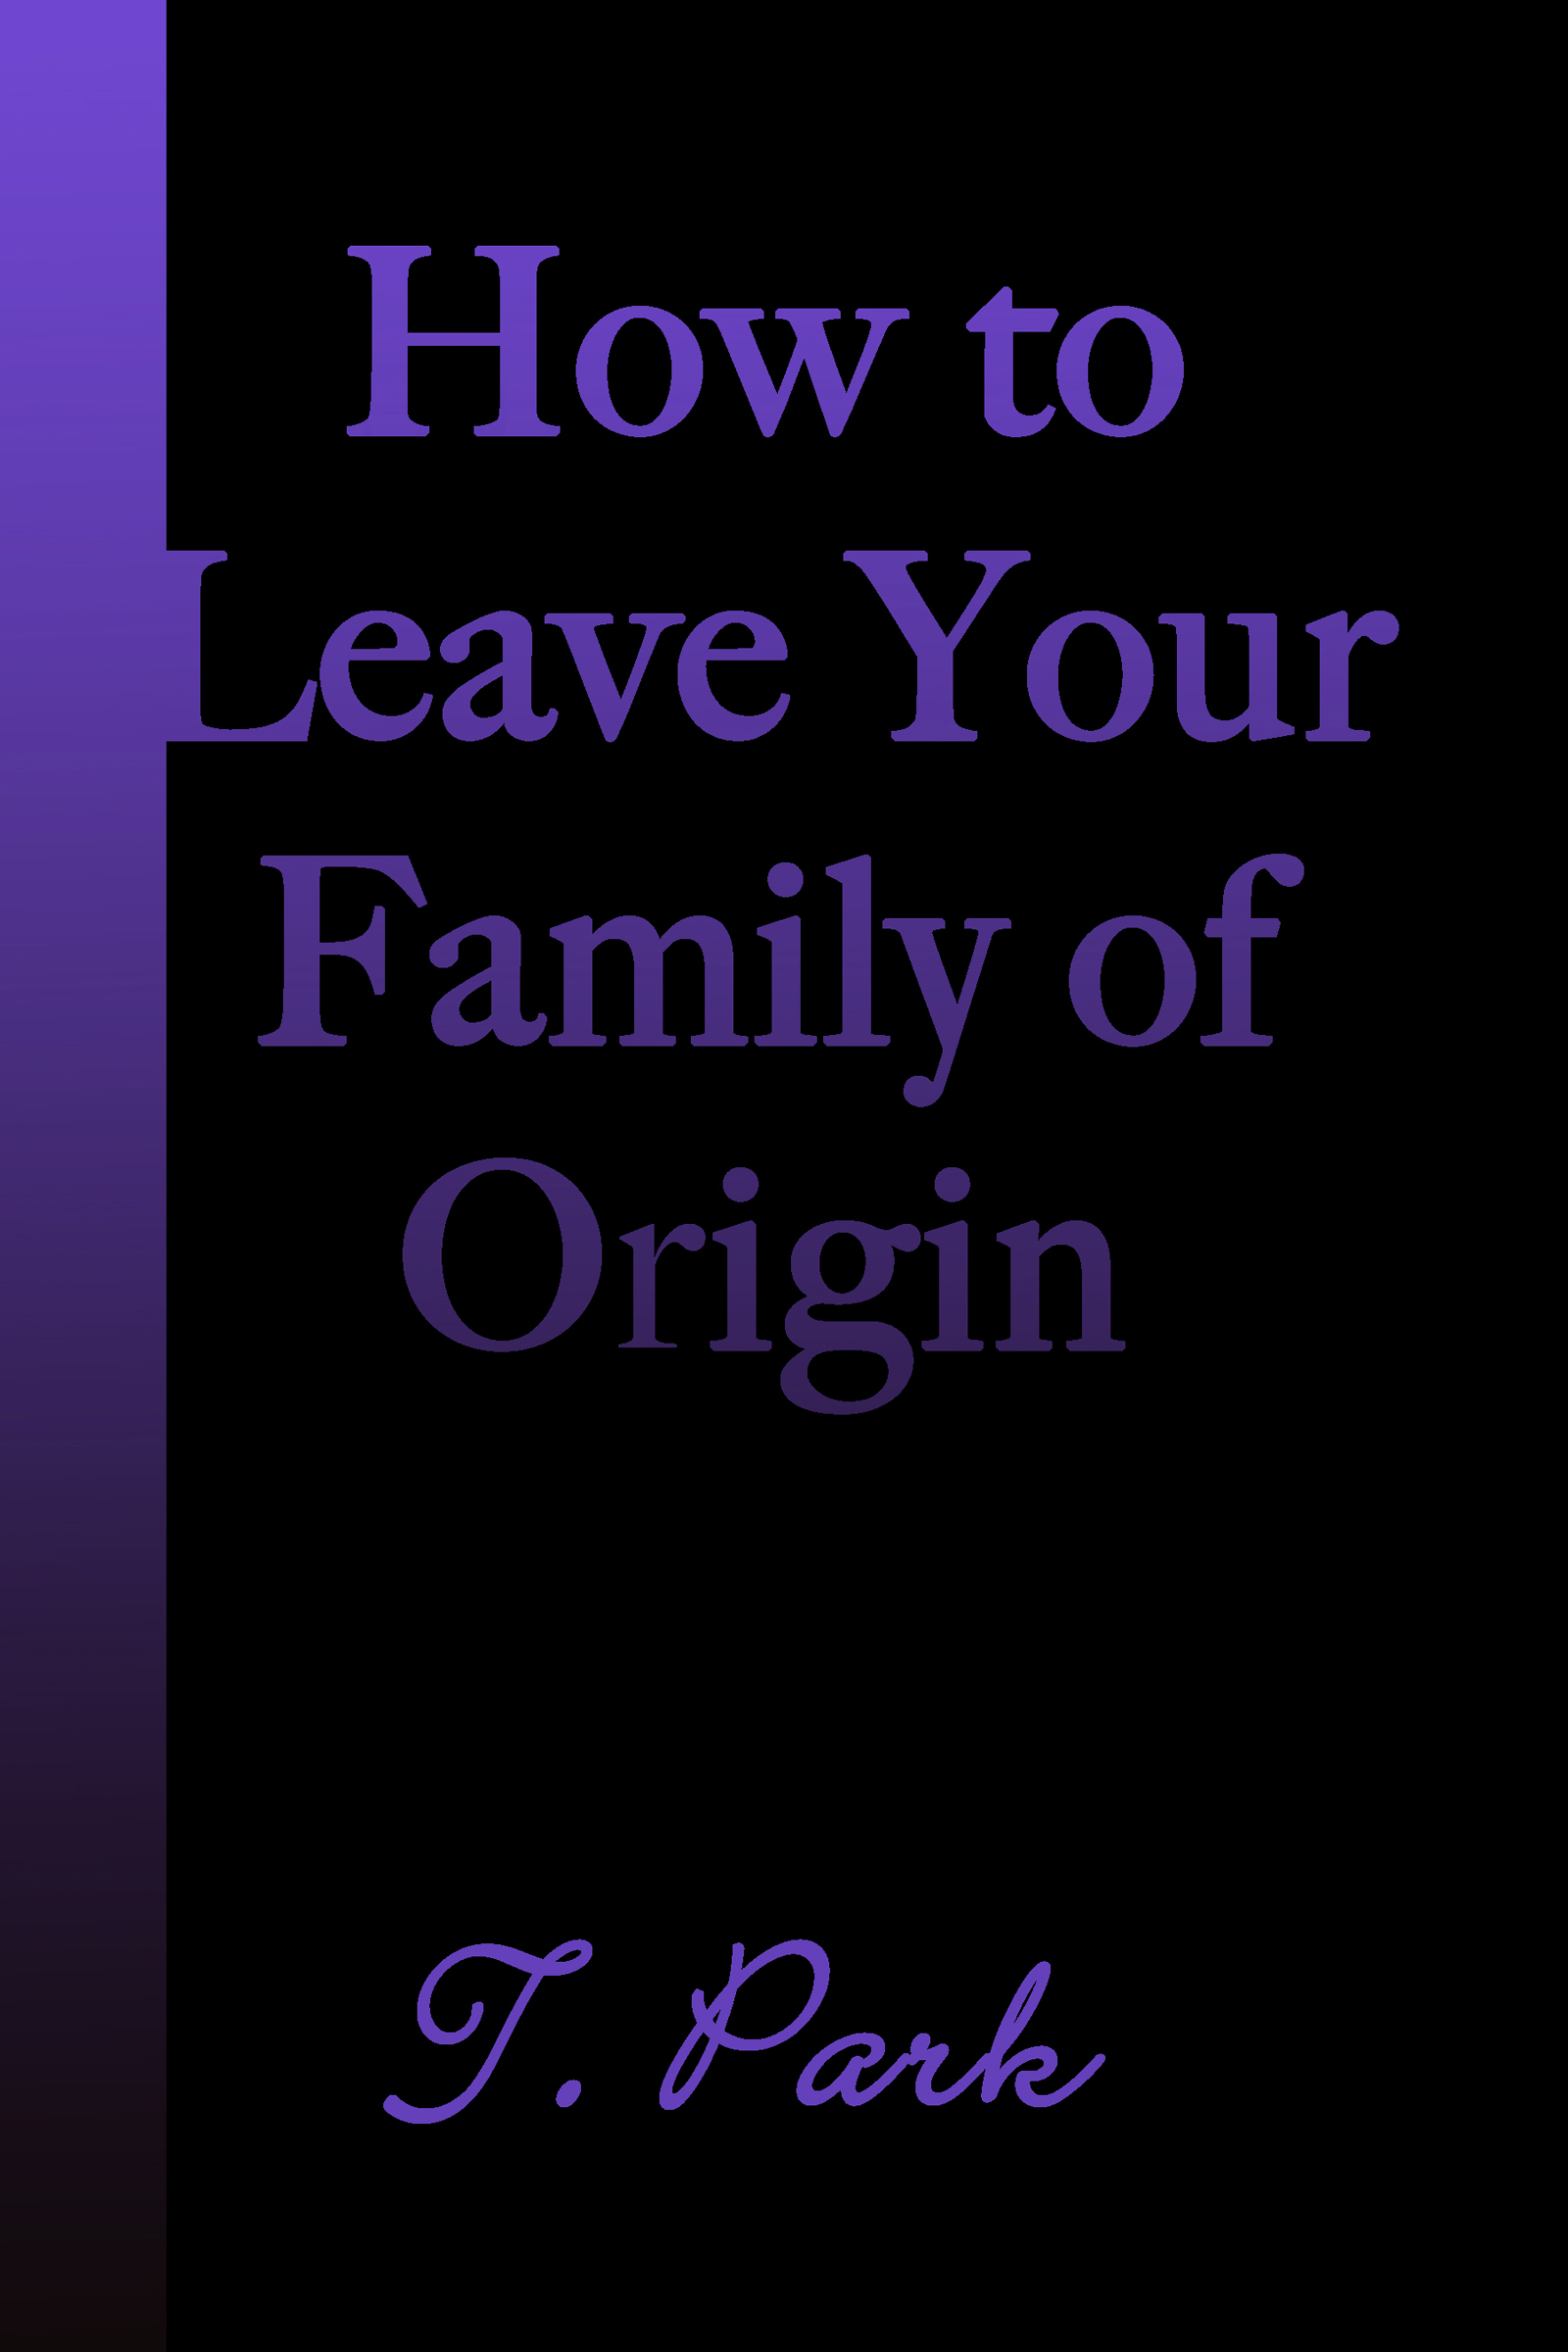 How to leave your Family of Origin